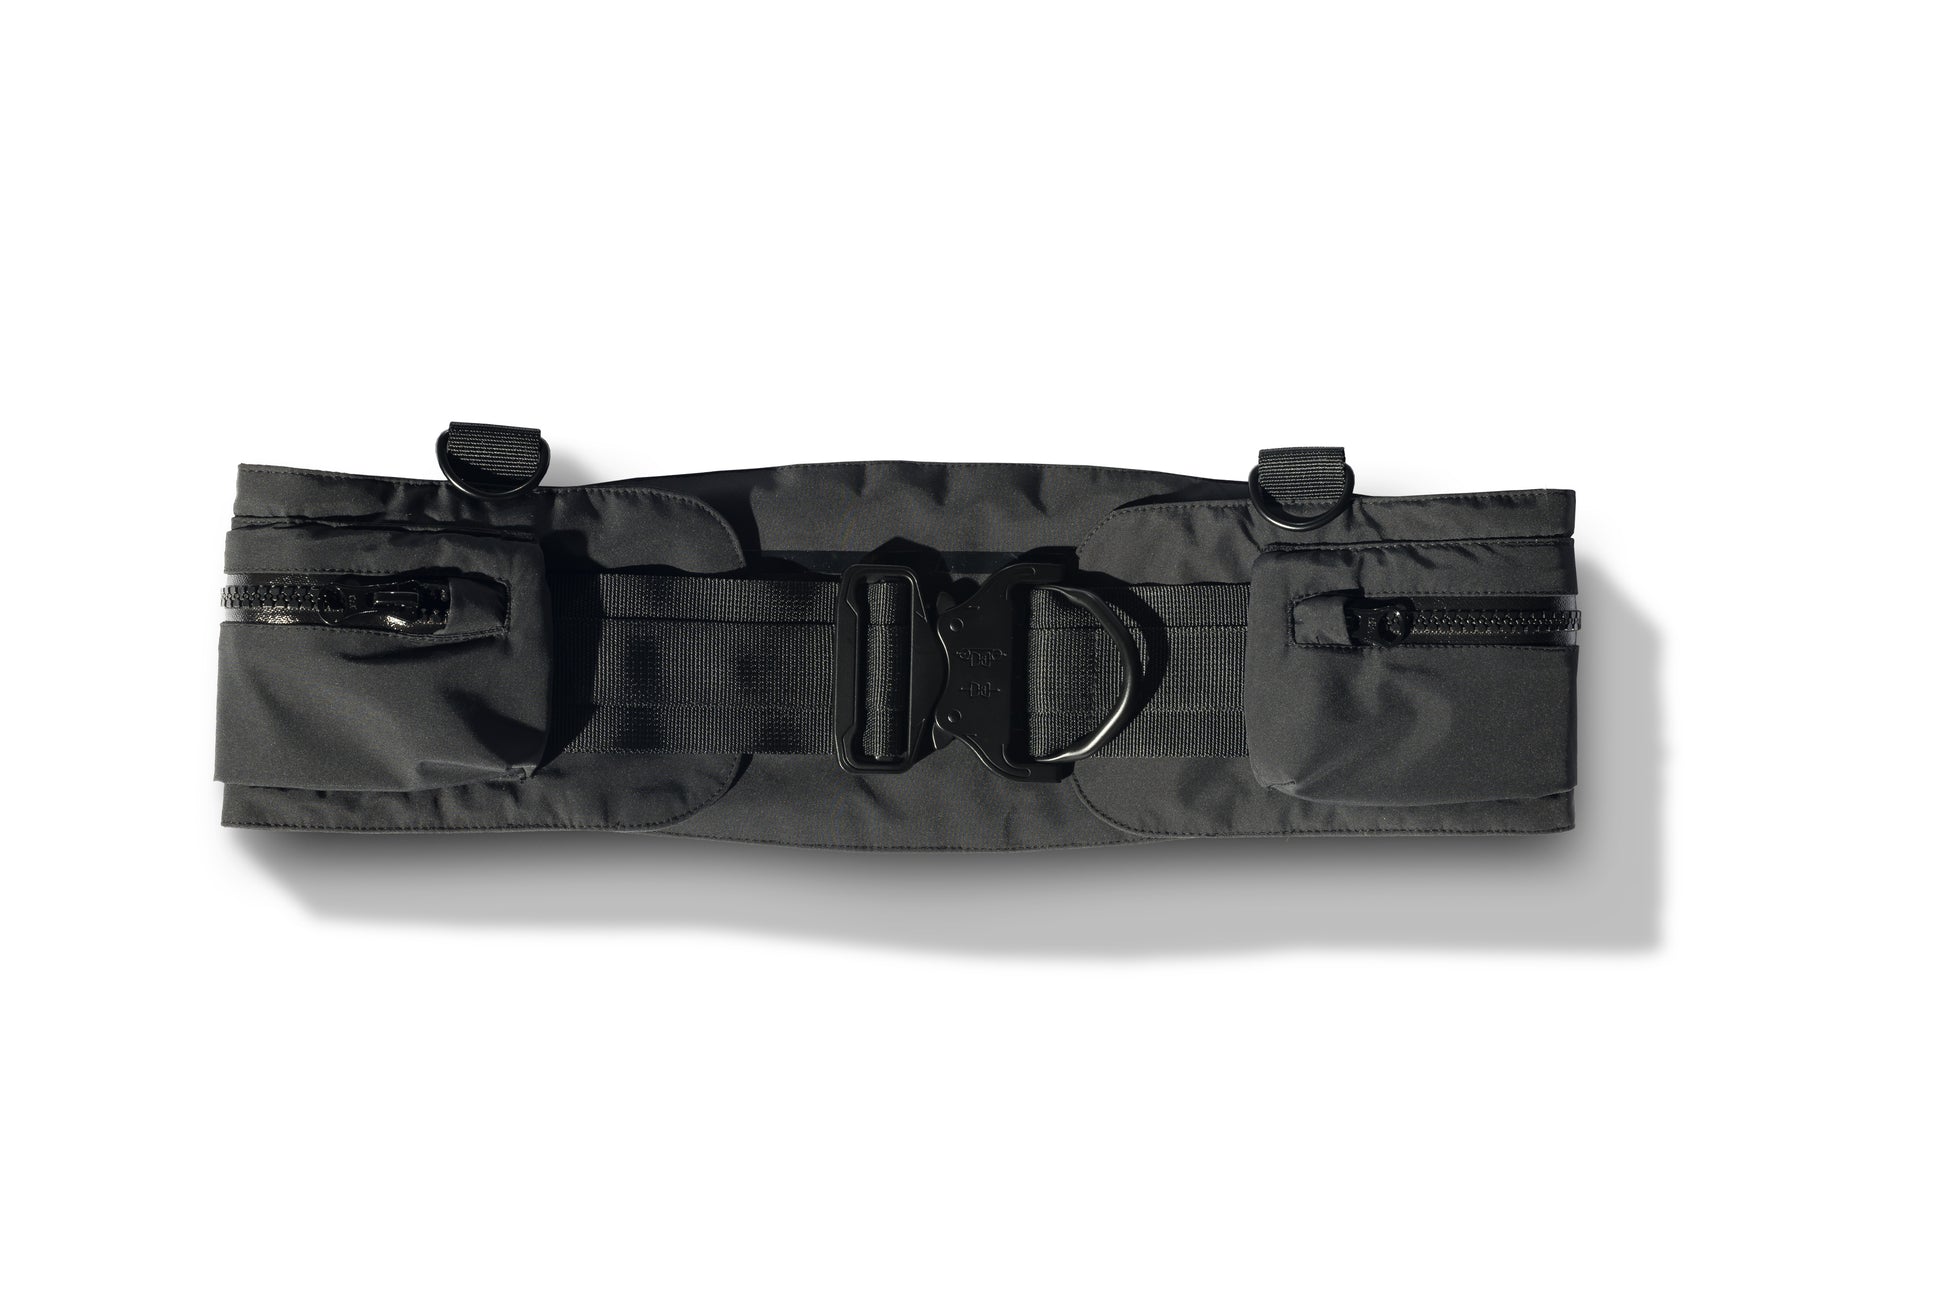 Cylar Unisex Tactical Modular Belt in 3-ply micro denier fabrication with DWR coating, cobra buckle closure with webbing straps, and three pockets with waterproof zippers, in Black